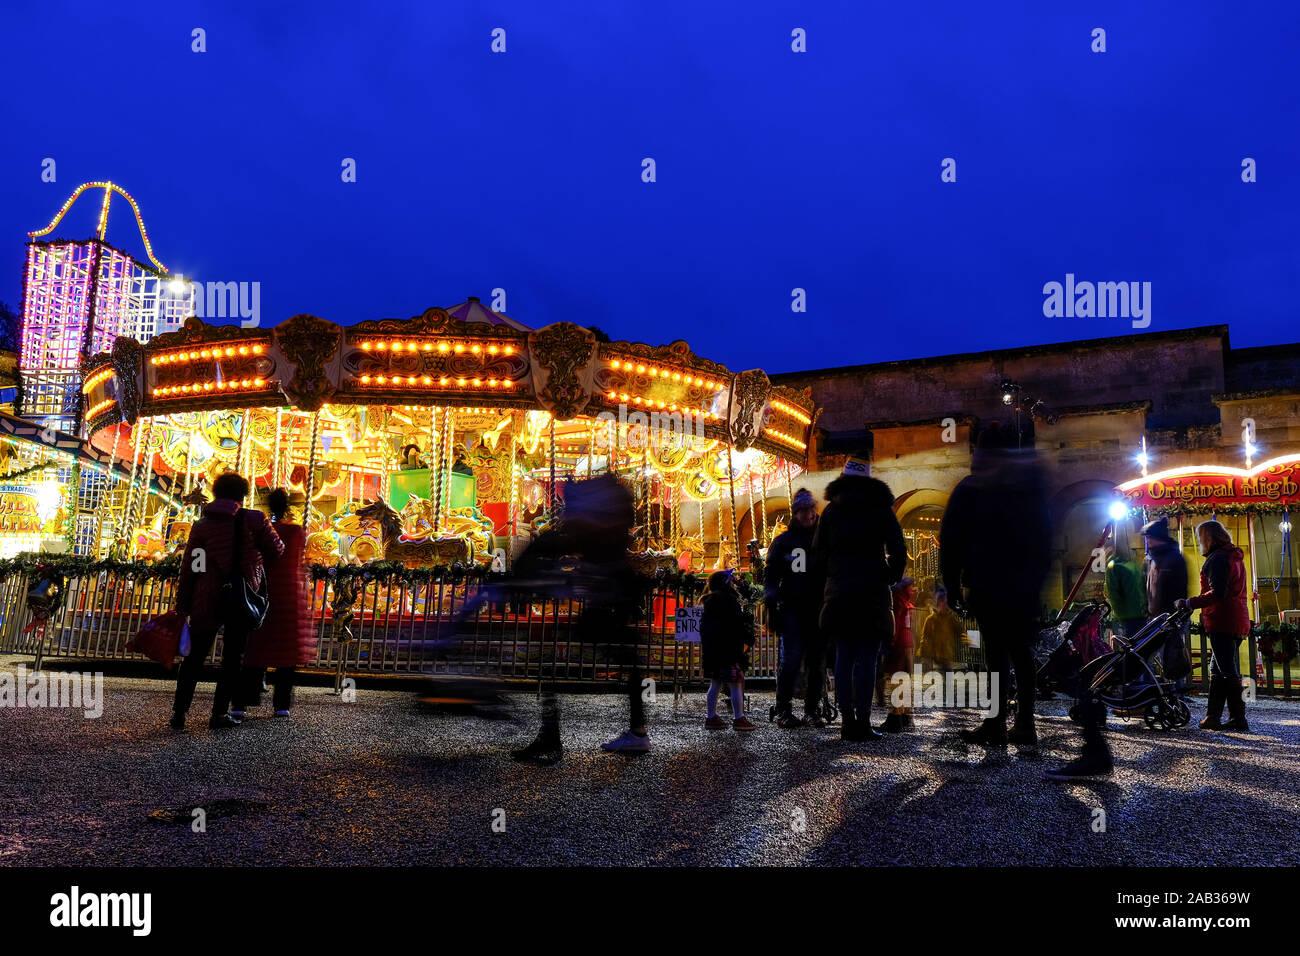 Fairground attractions at the Blenheim Palace Christmas Markets Stock Photo